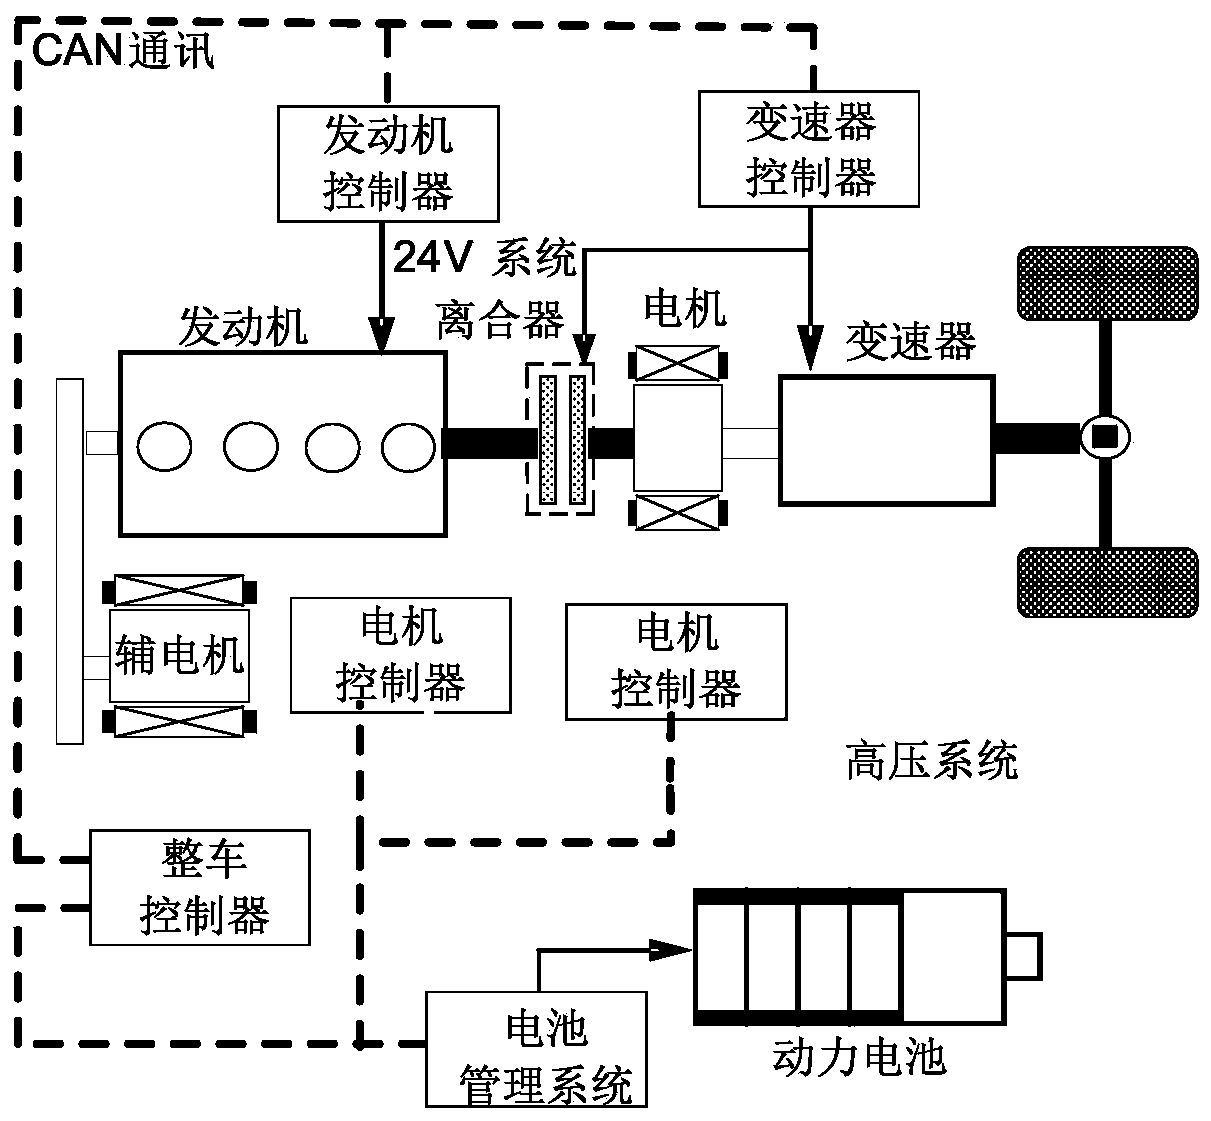 A hybrid electric bus bus stop area control method based on intelligent traffic information